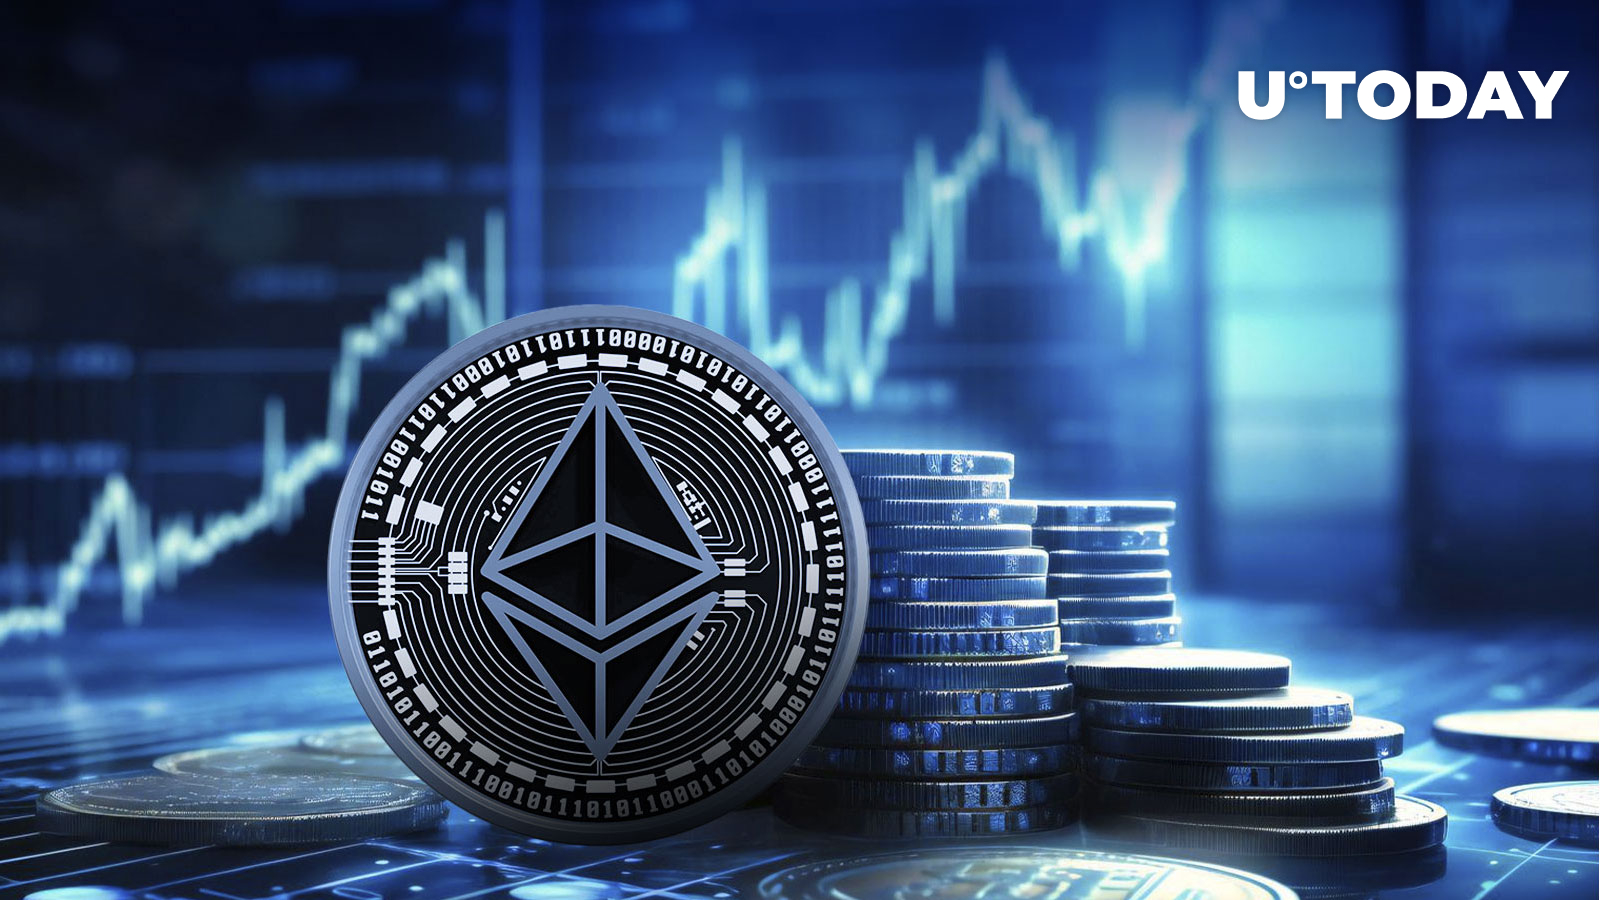 Ethereum (ETH) Soars to ,400, Institutional FOMO Yet to Kick In – What’s Next?